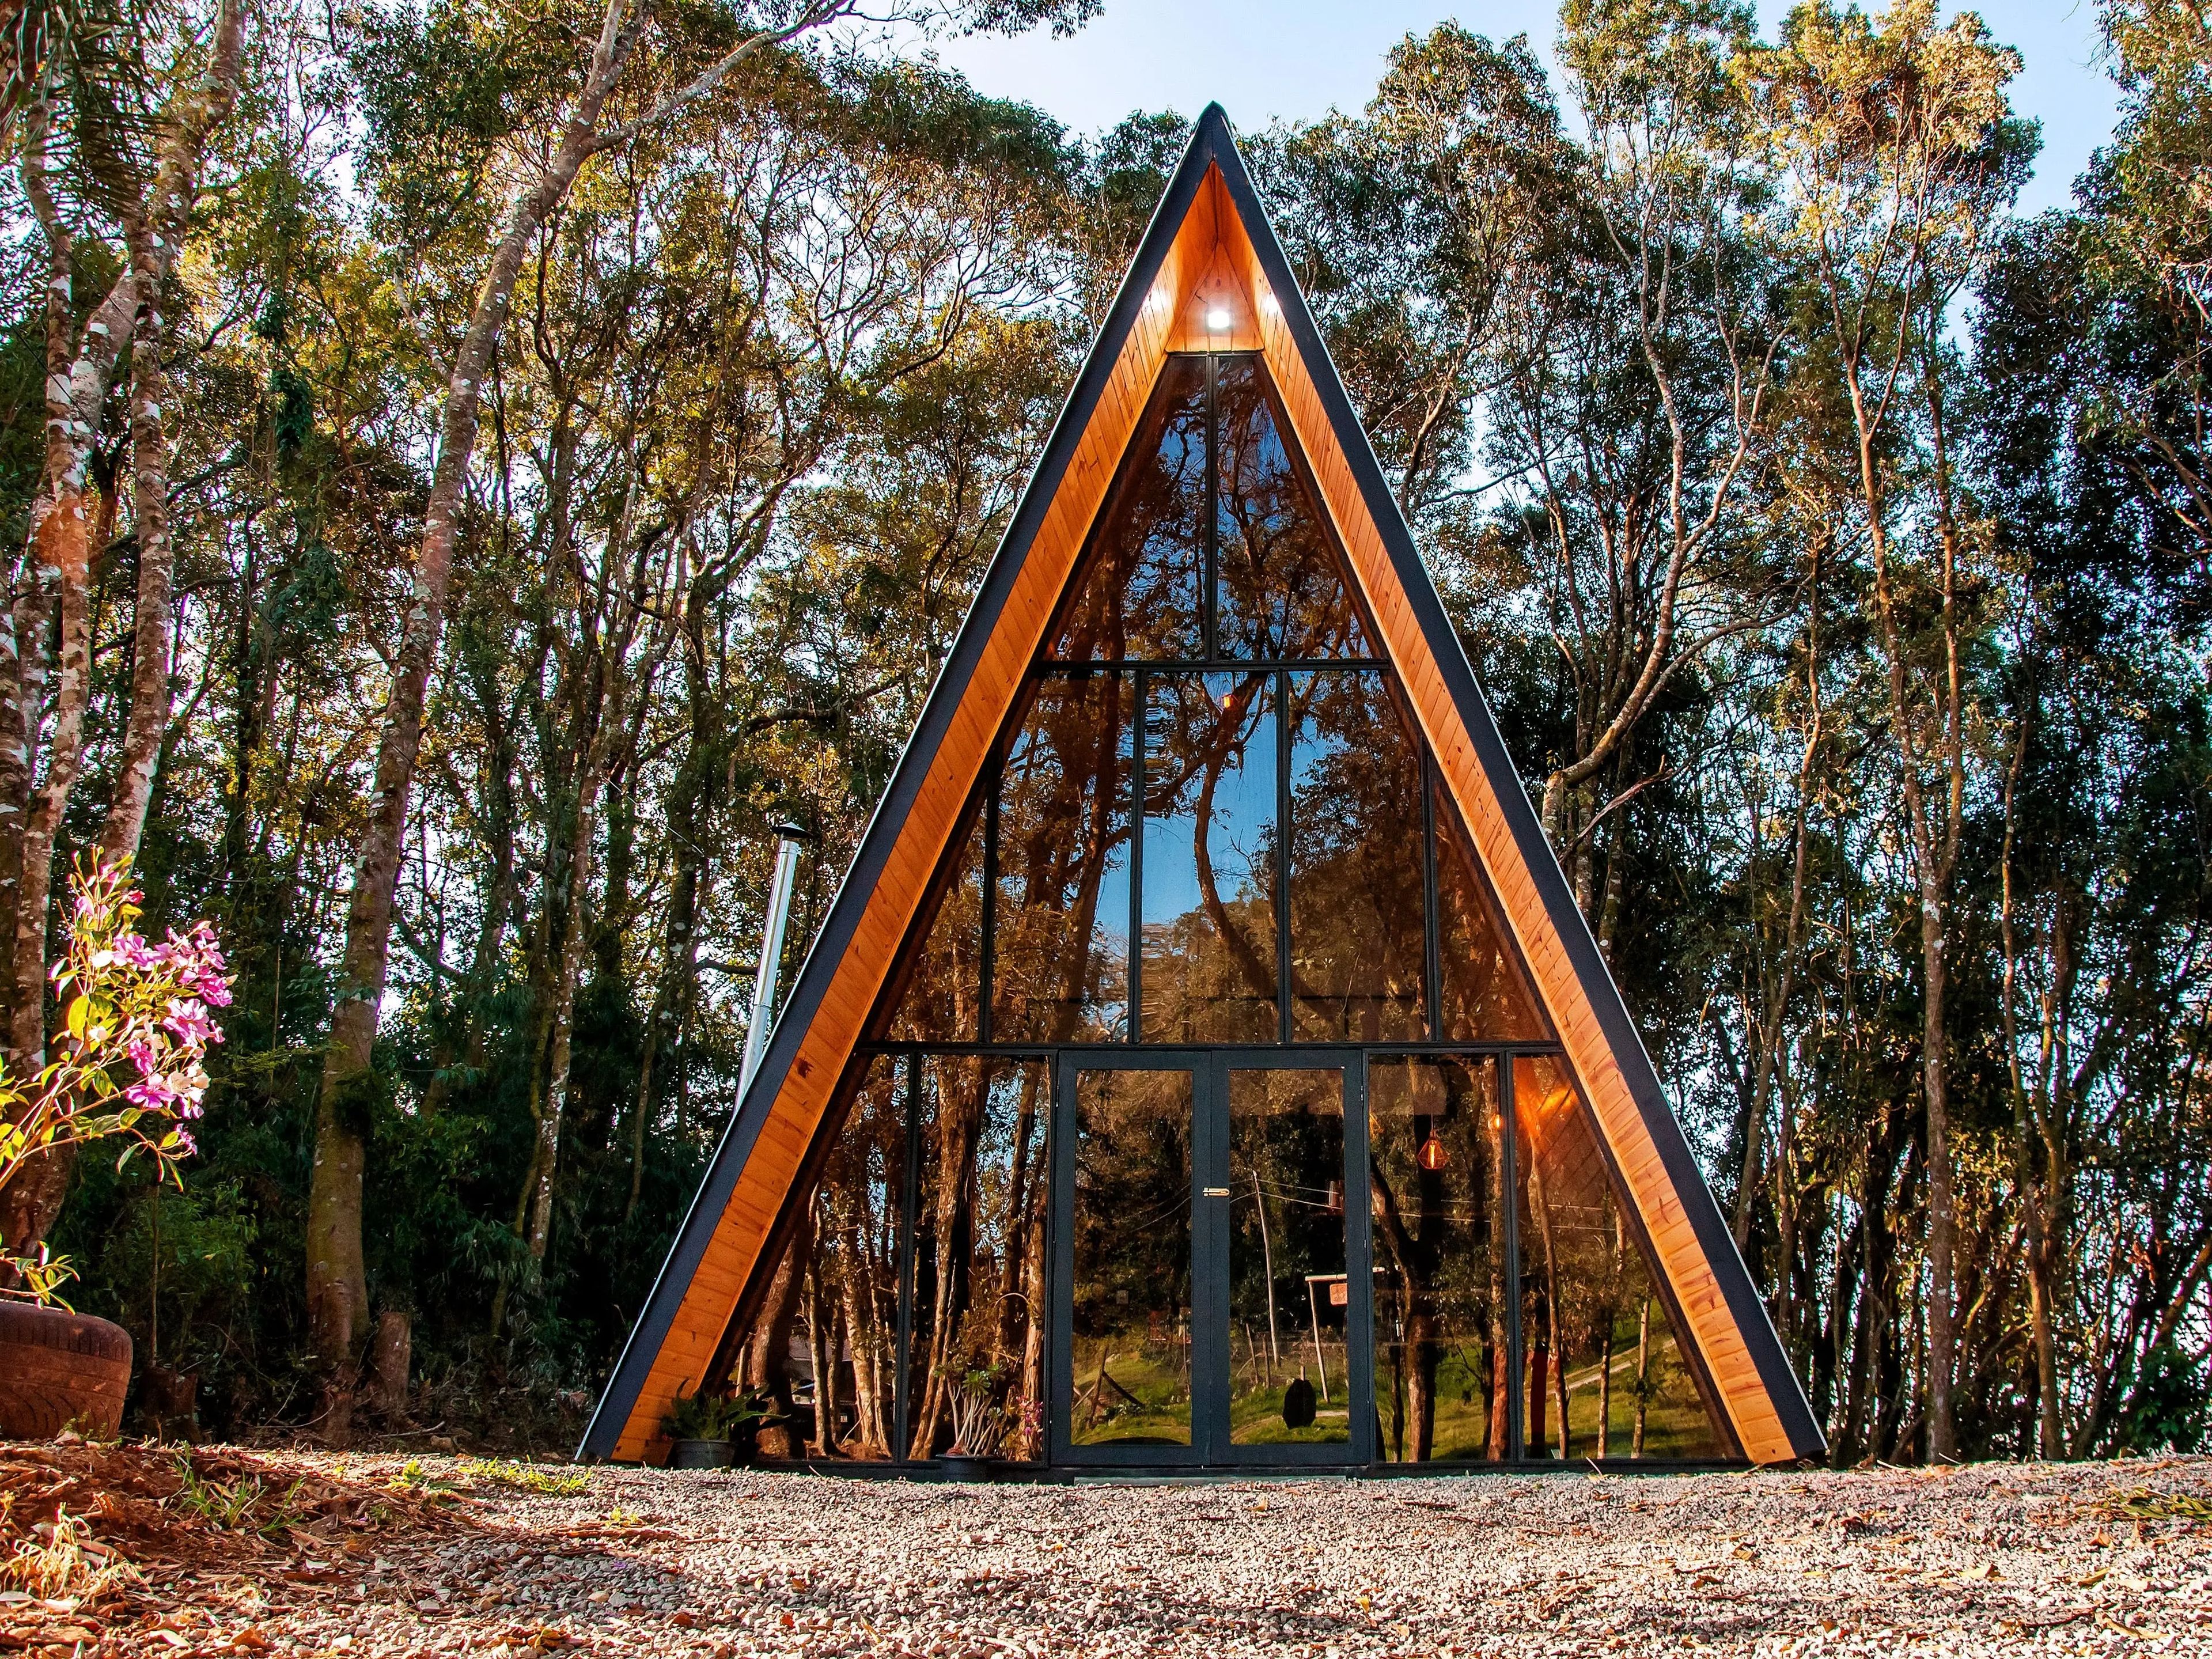 A-frame Airbnb cabin in southern Brazil